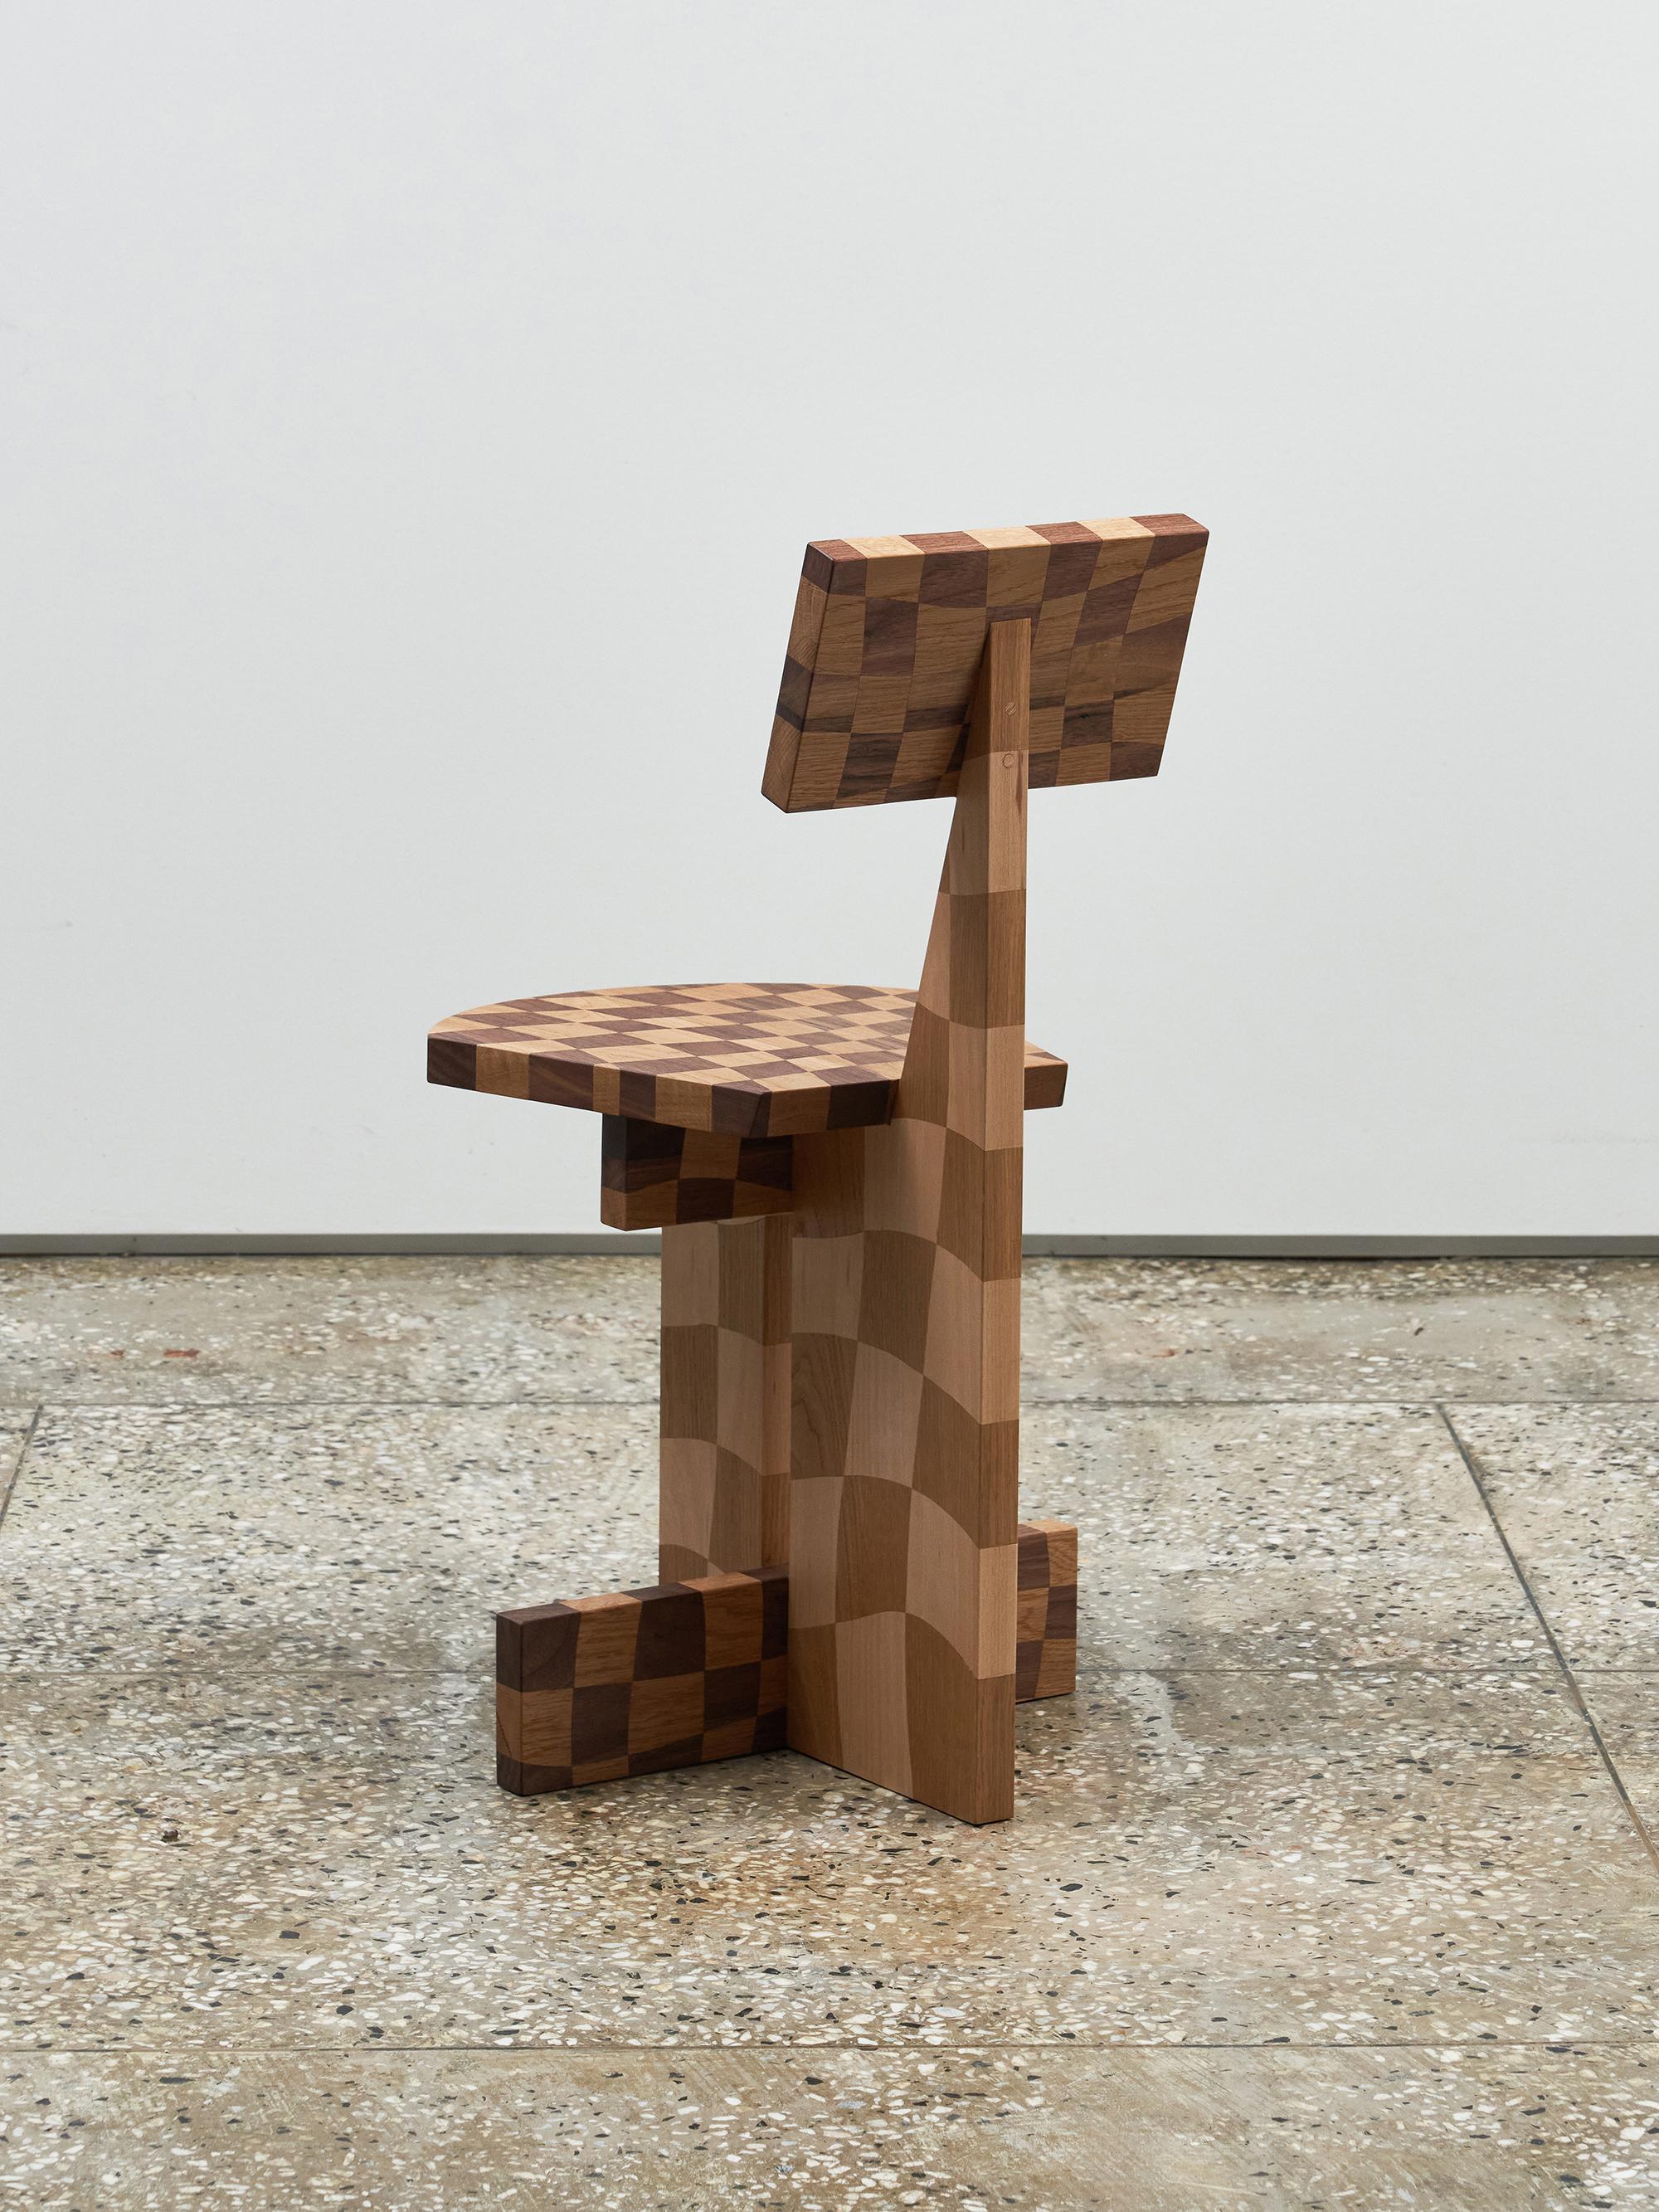 MIX WOOD is a series of wood furniture utilizing traditional woodworking technique called ‘endgrain’ which cross-connects different species of wood. This technique is mainly perceived as an old method to make patterned cut- ting board. Kuo Duo aimed